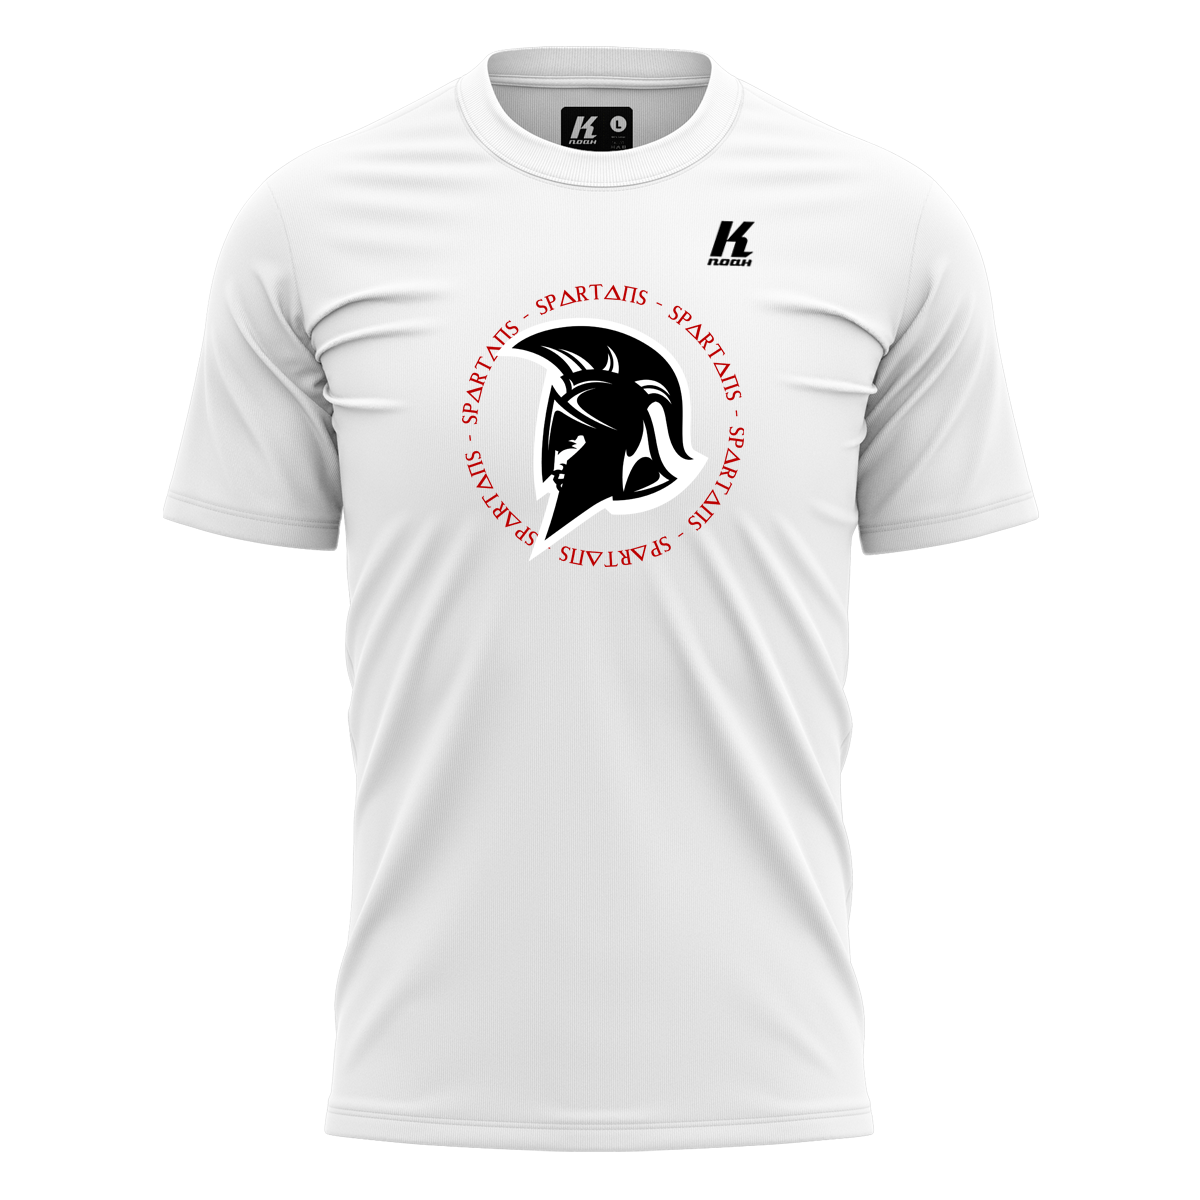 Spartans Fan Tee "Collection" white